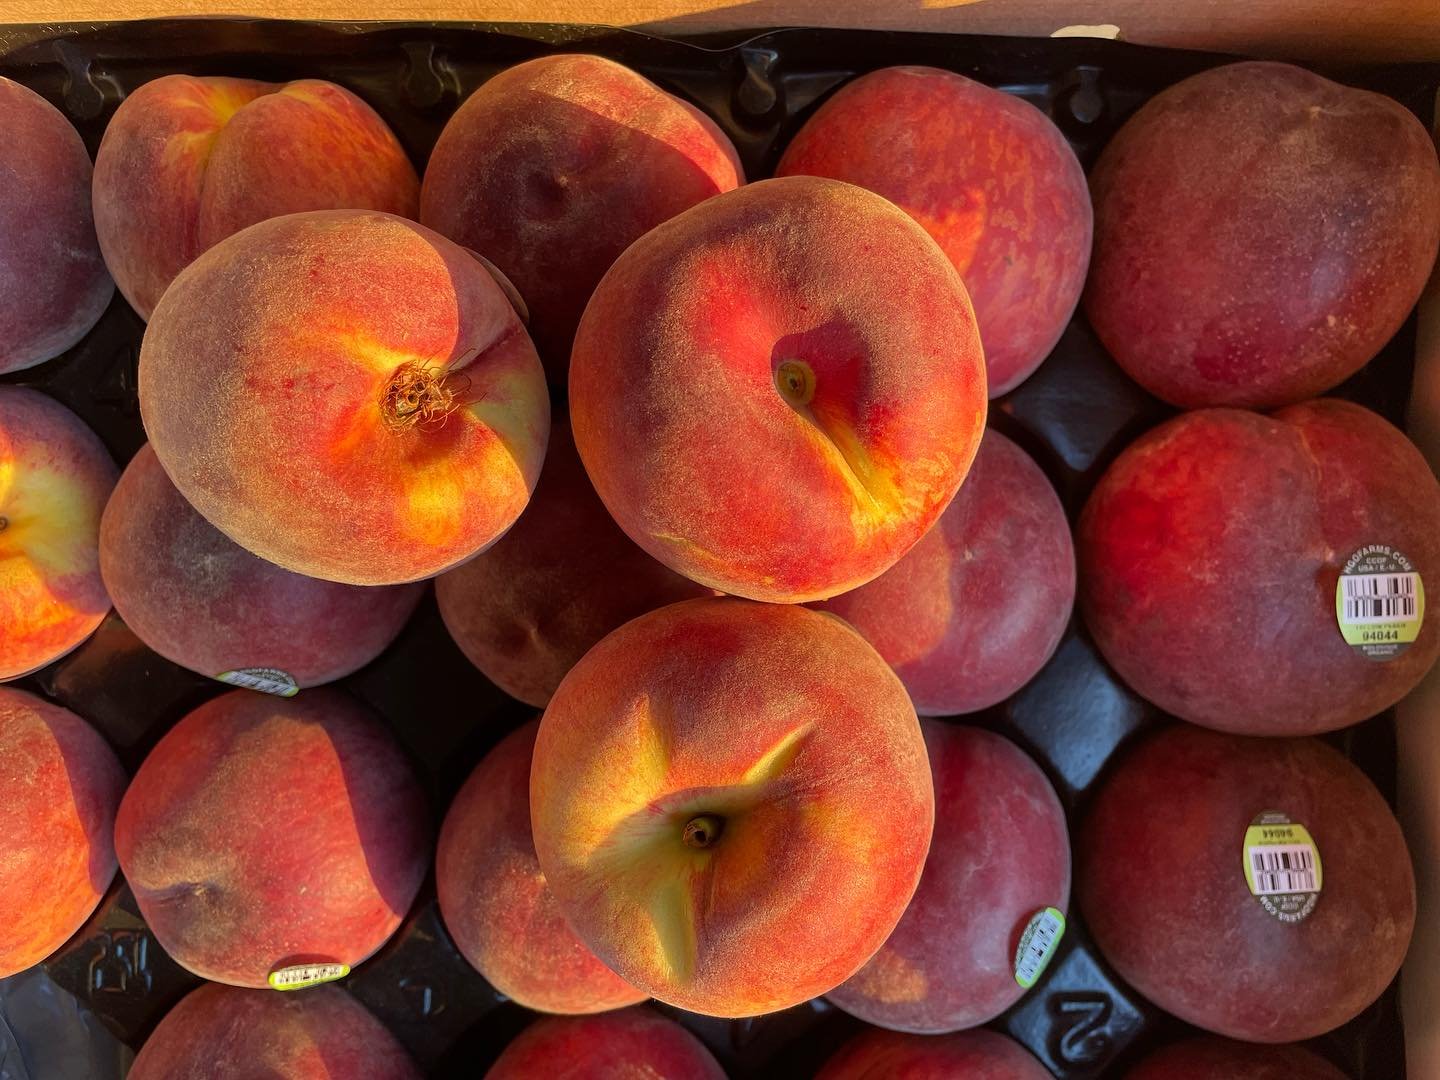 🍑🍑 Krista Peaches!!! 🍑🍑

The first peaches of the year arrived to our warehouse today from @hgofarms. They&rsquo;re very fragrant and we expect them to ripen beautifully &mdash; a great teaser for what&rsquo;s to come! 

#followtheflavor #passion